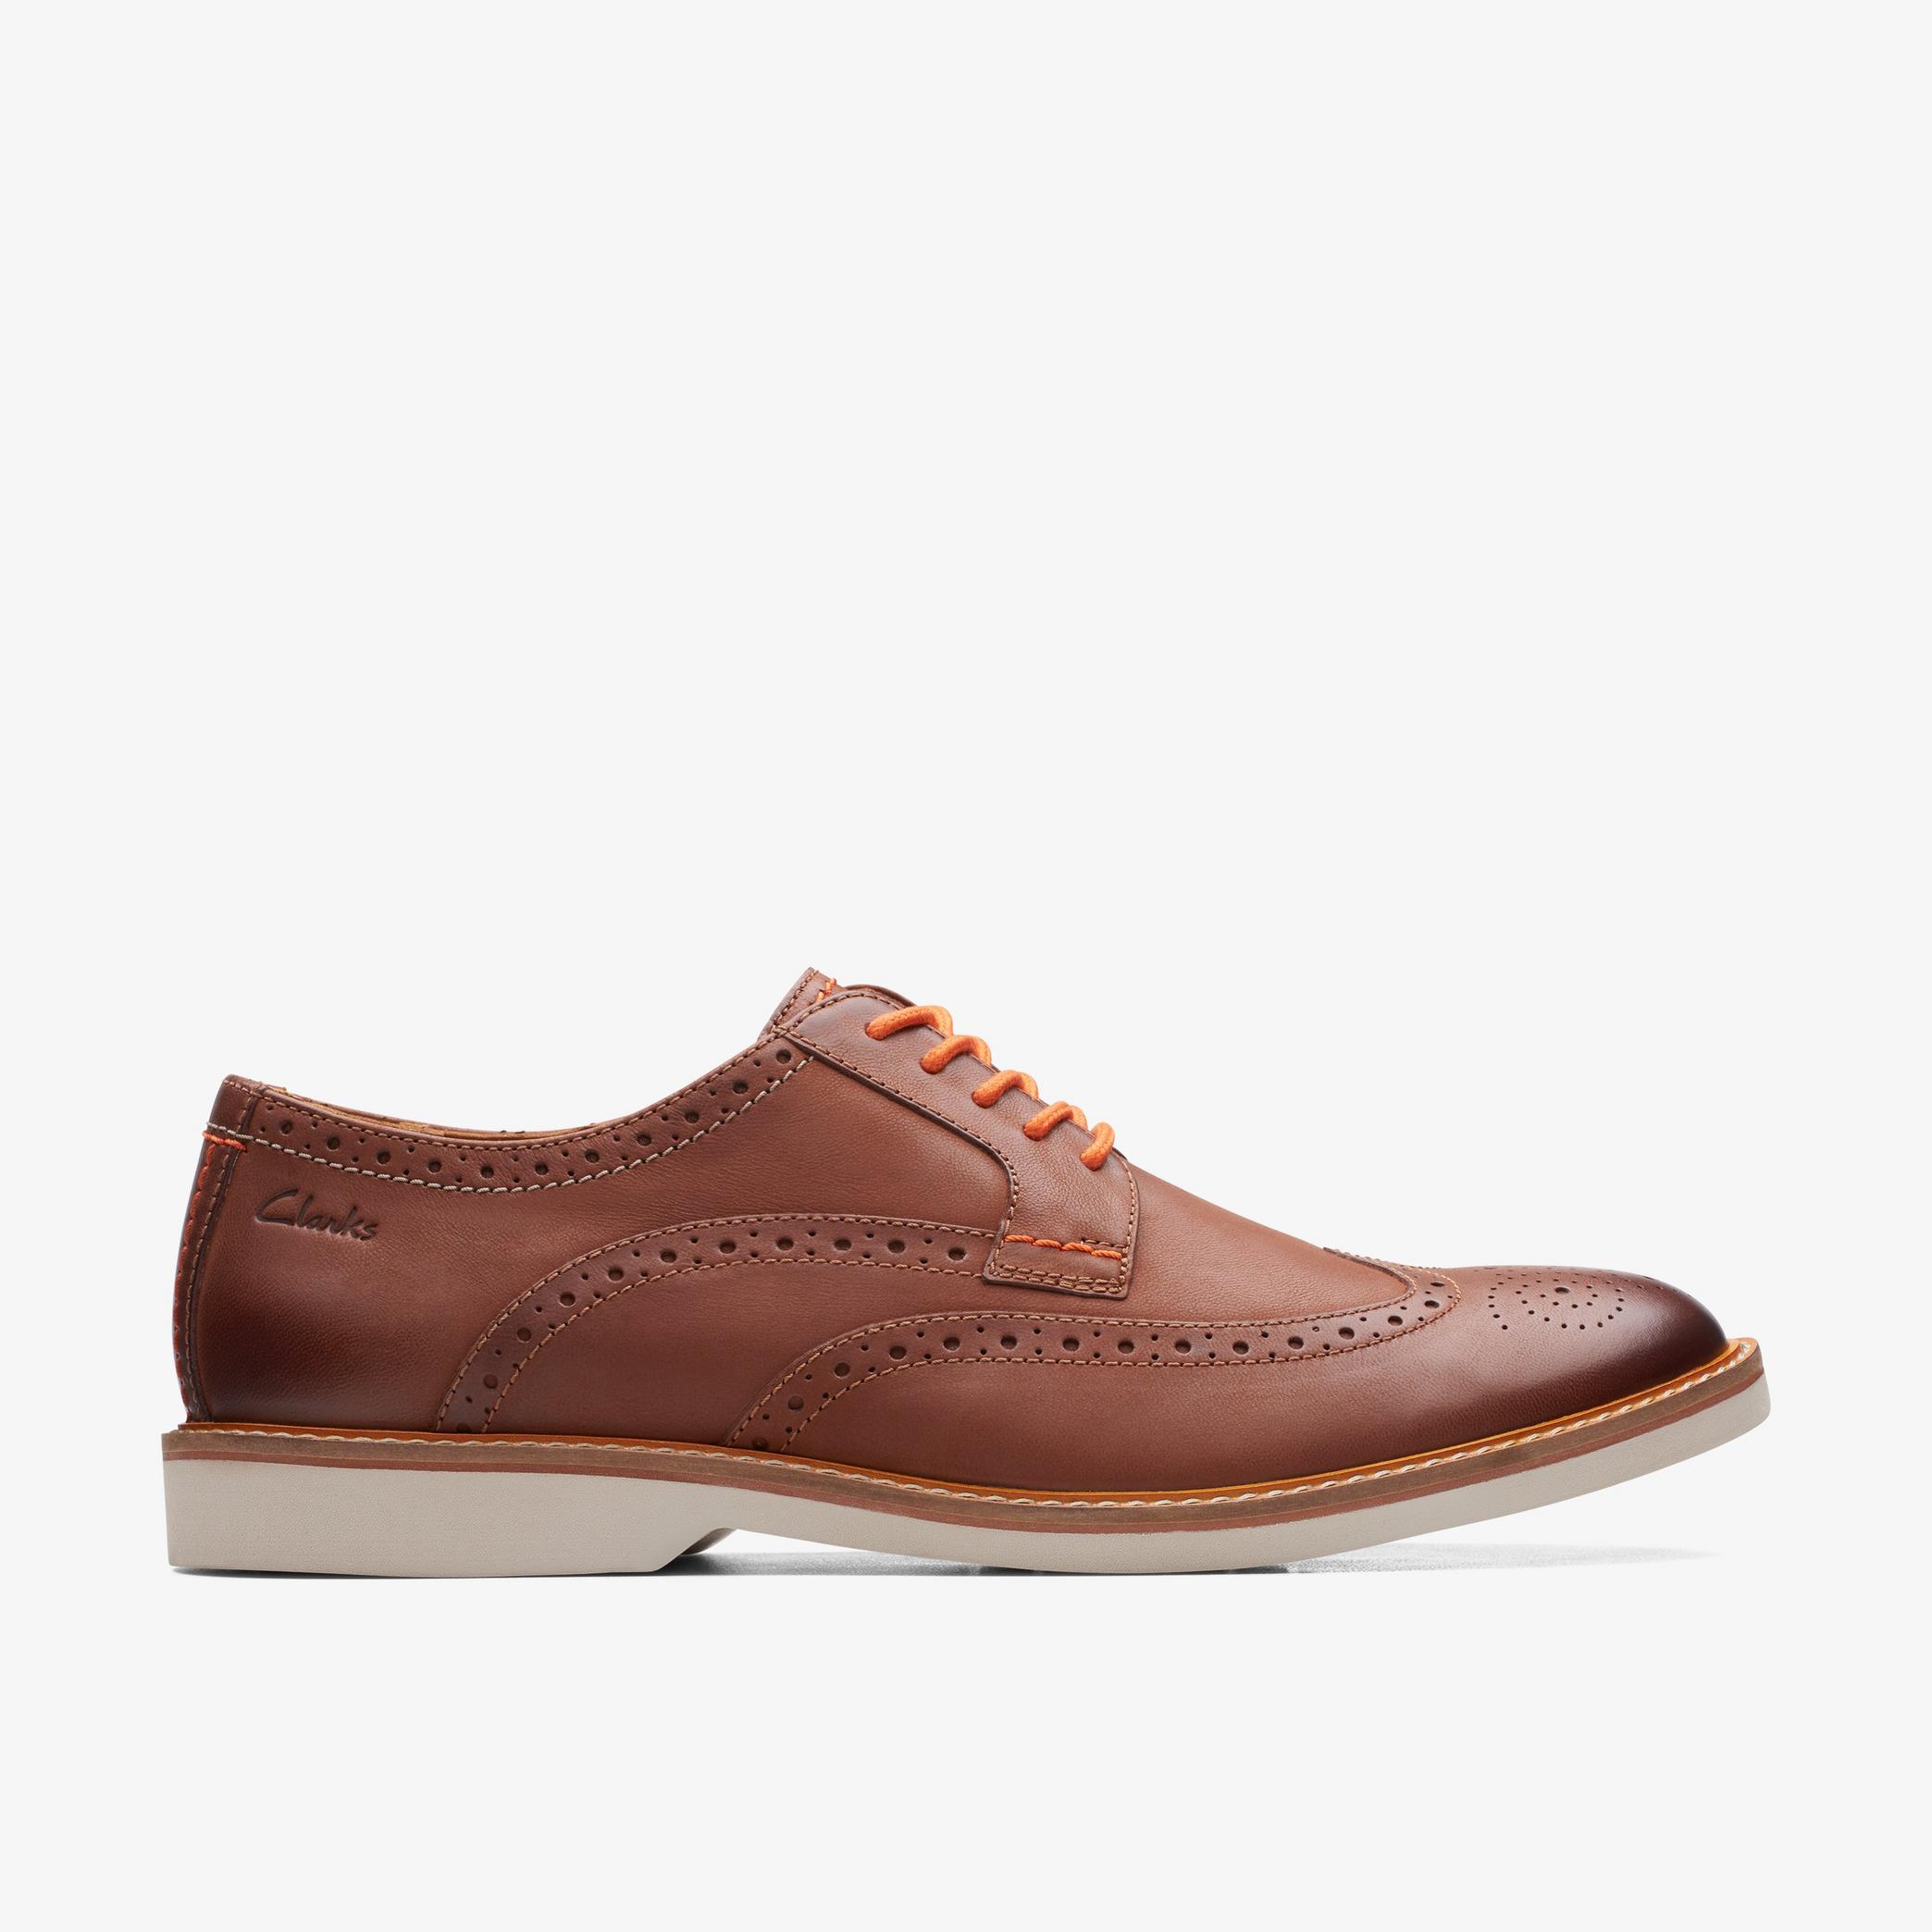 Mens Atticus Leather Limit Dark Tan Leather Oxford Shoes